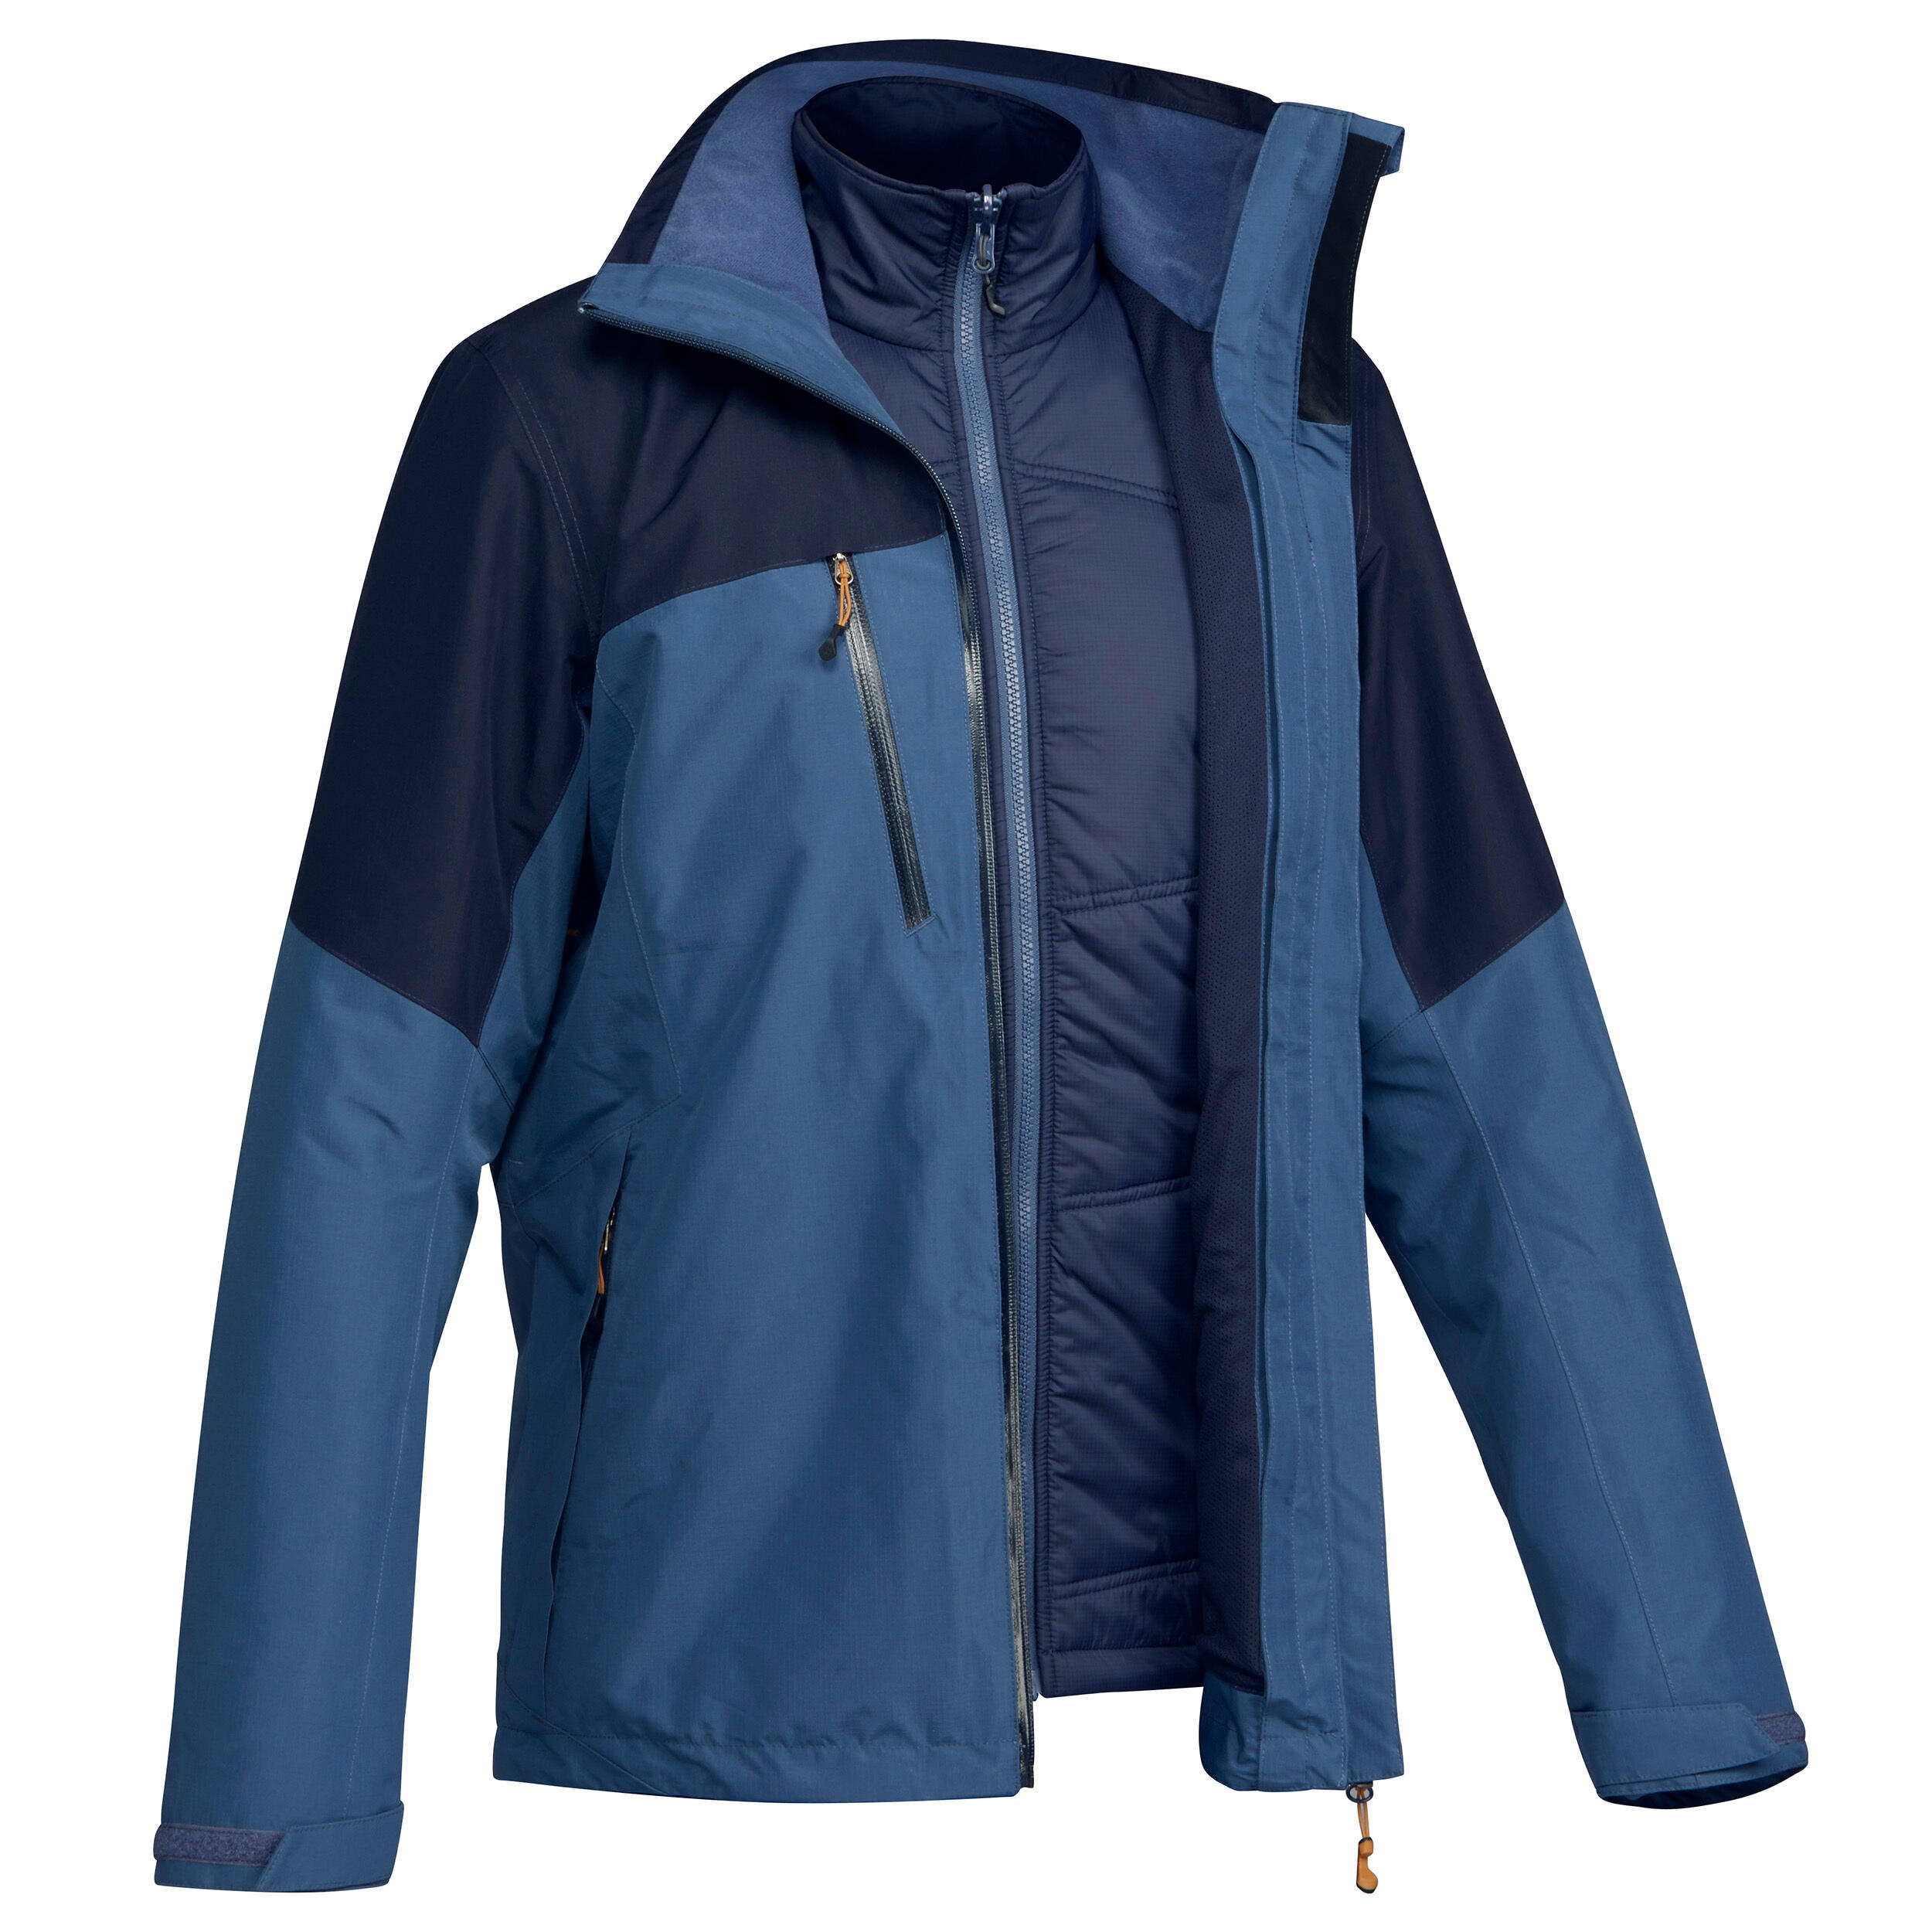 Winter Jacket Travel 500 | Warm and 